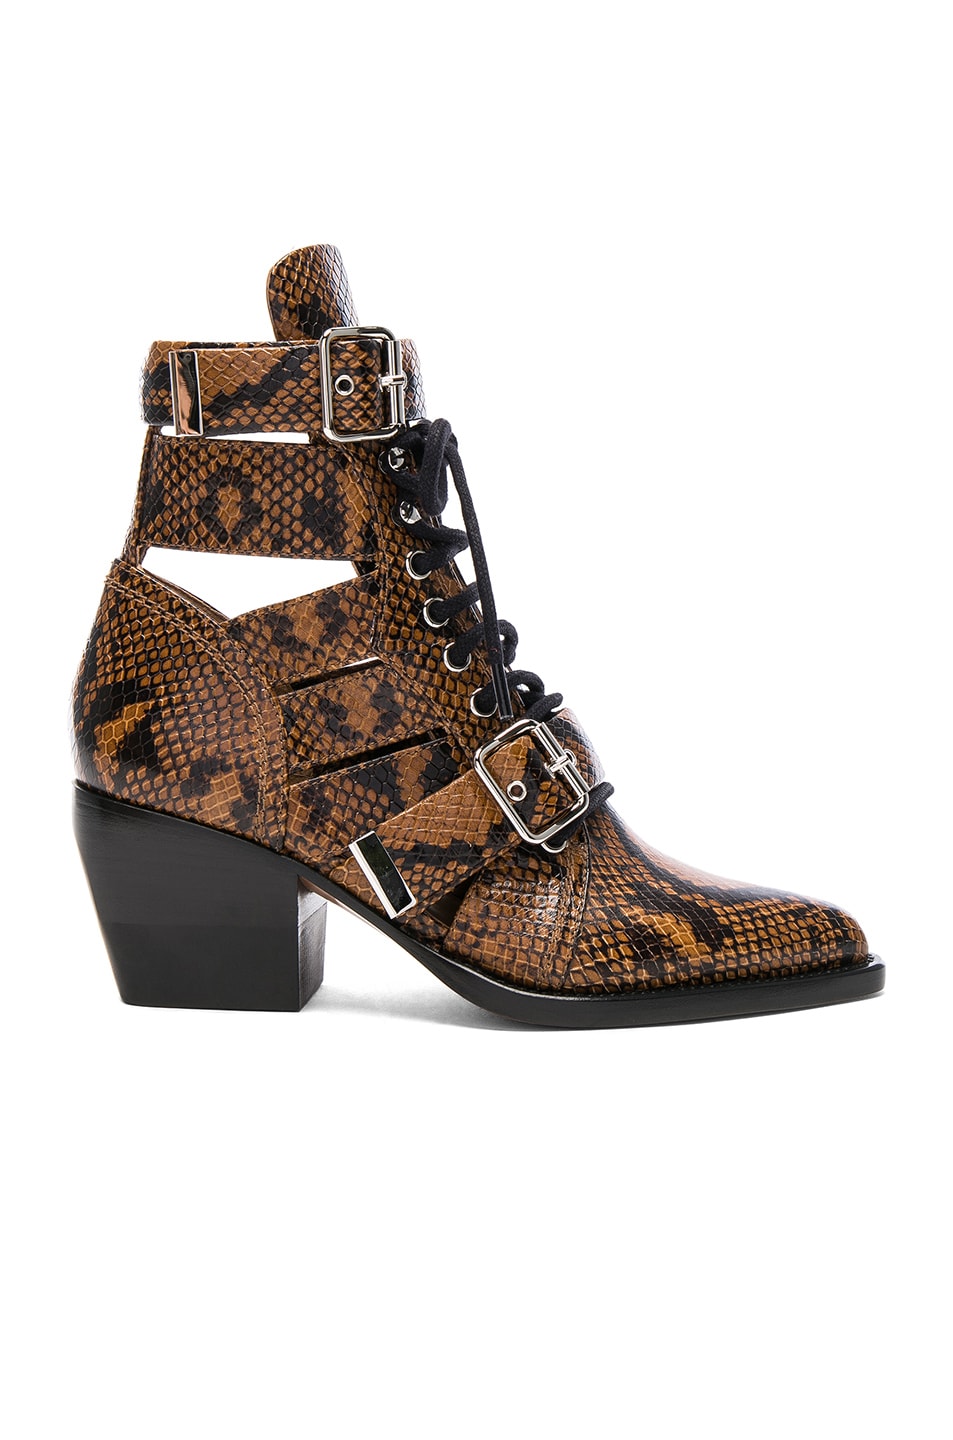 Image 1 of Chloe Rylee Python Print Leather Lace Up Buckle Boots in Light Tan